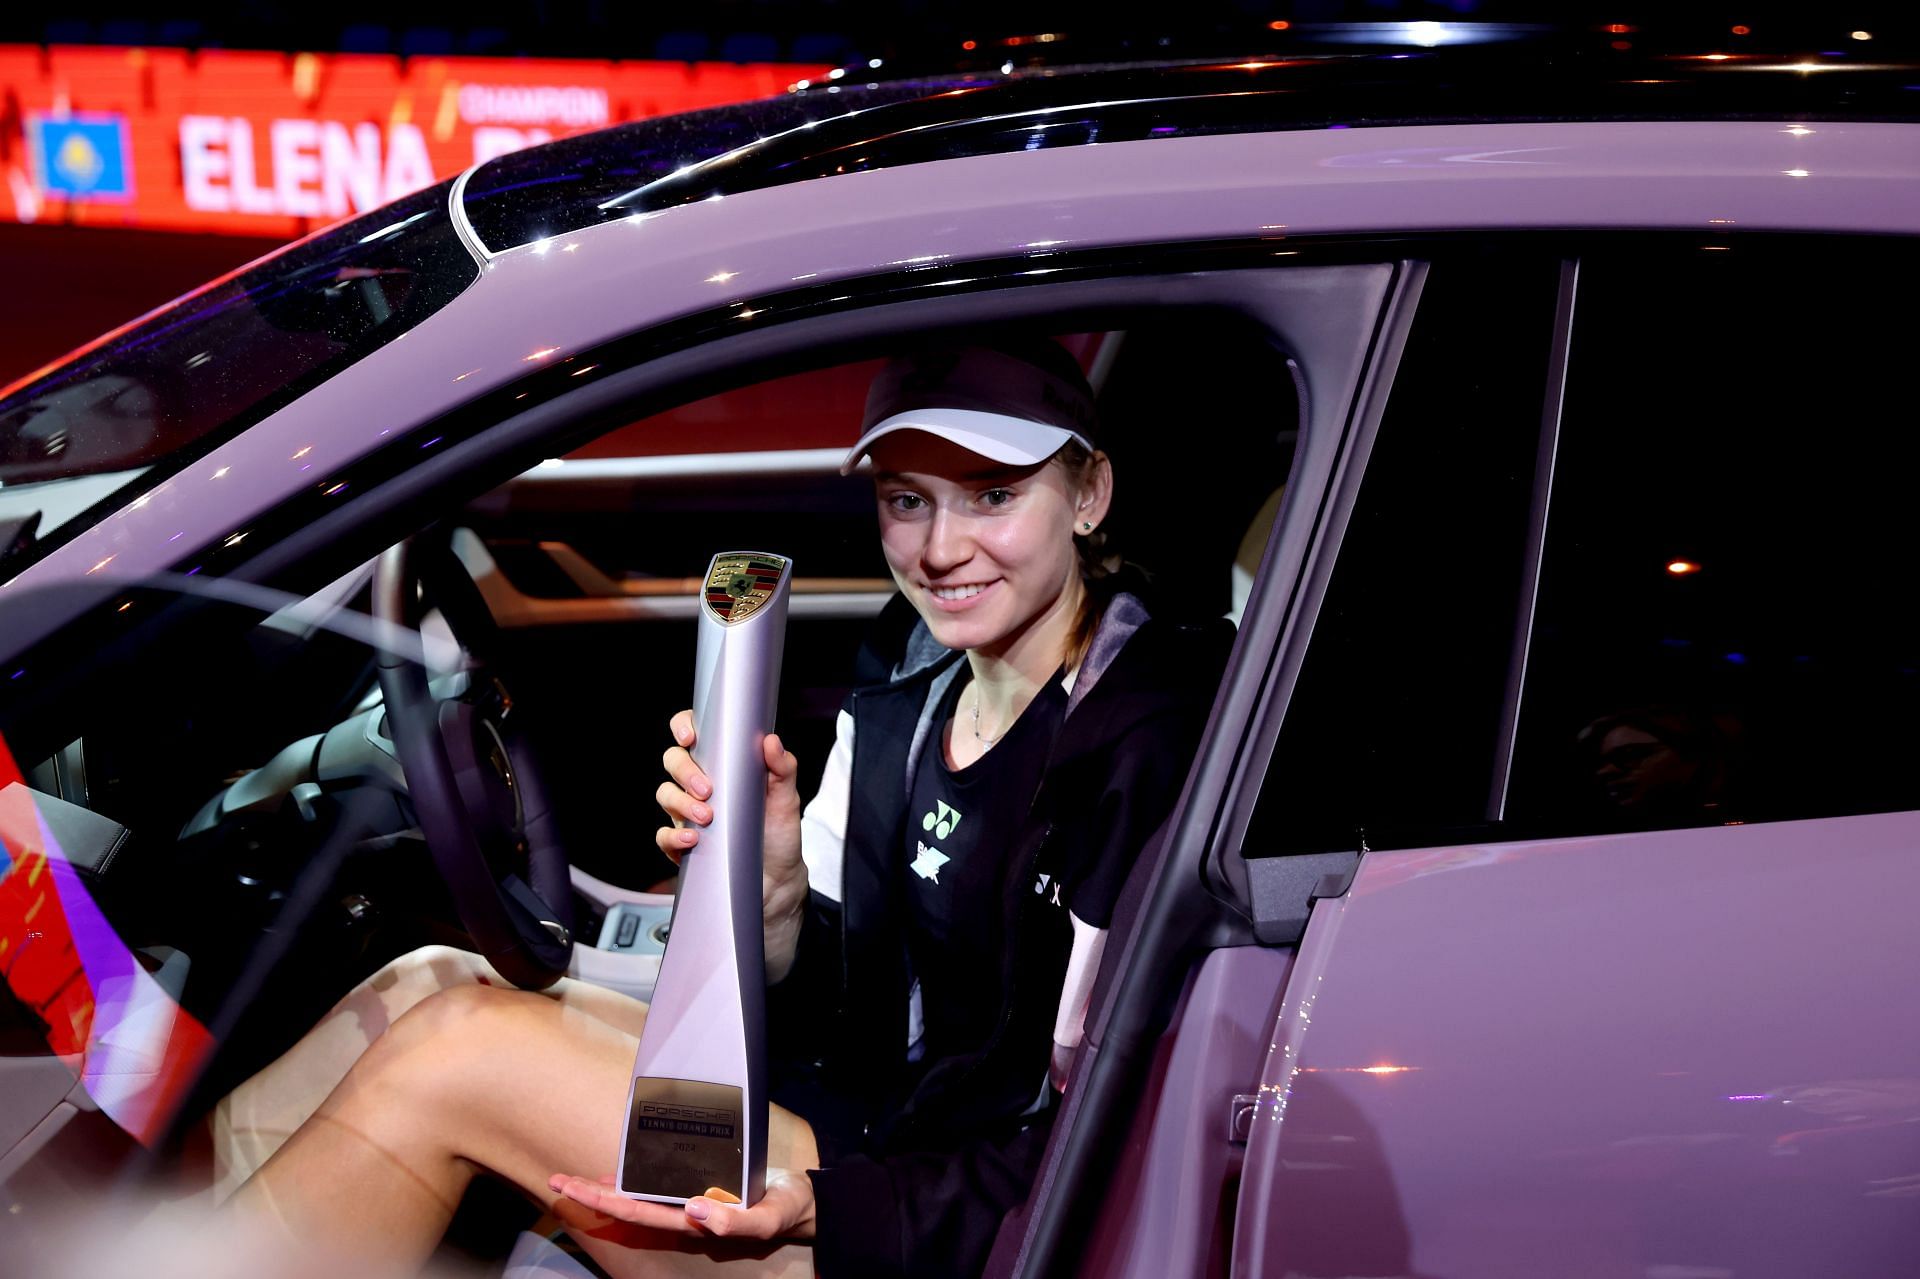 “Elena Rybakina getting $200000 Porsche before getting drivers license is iconic” - Fans react hilariously to Kazakh’s title triumph in Stuttgart